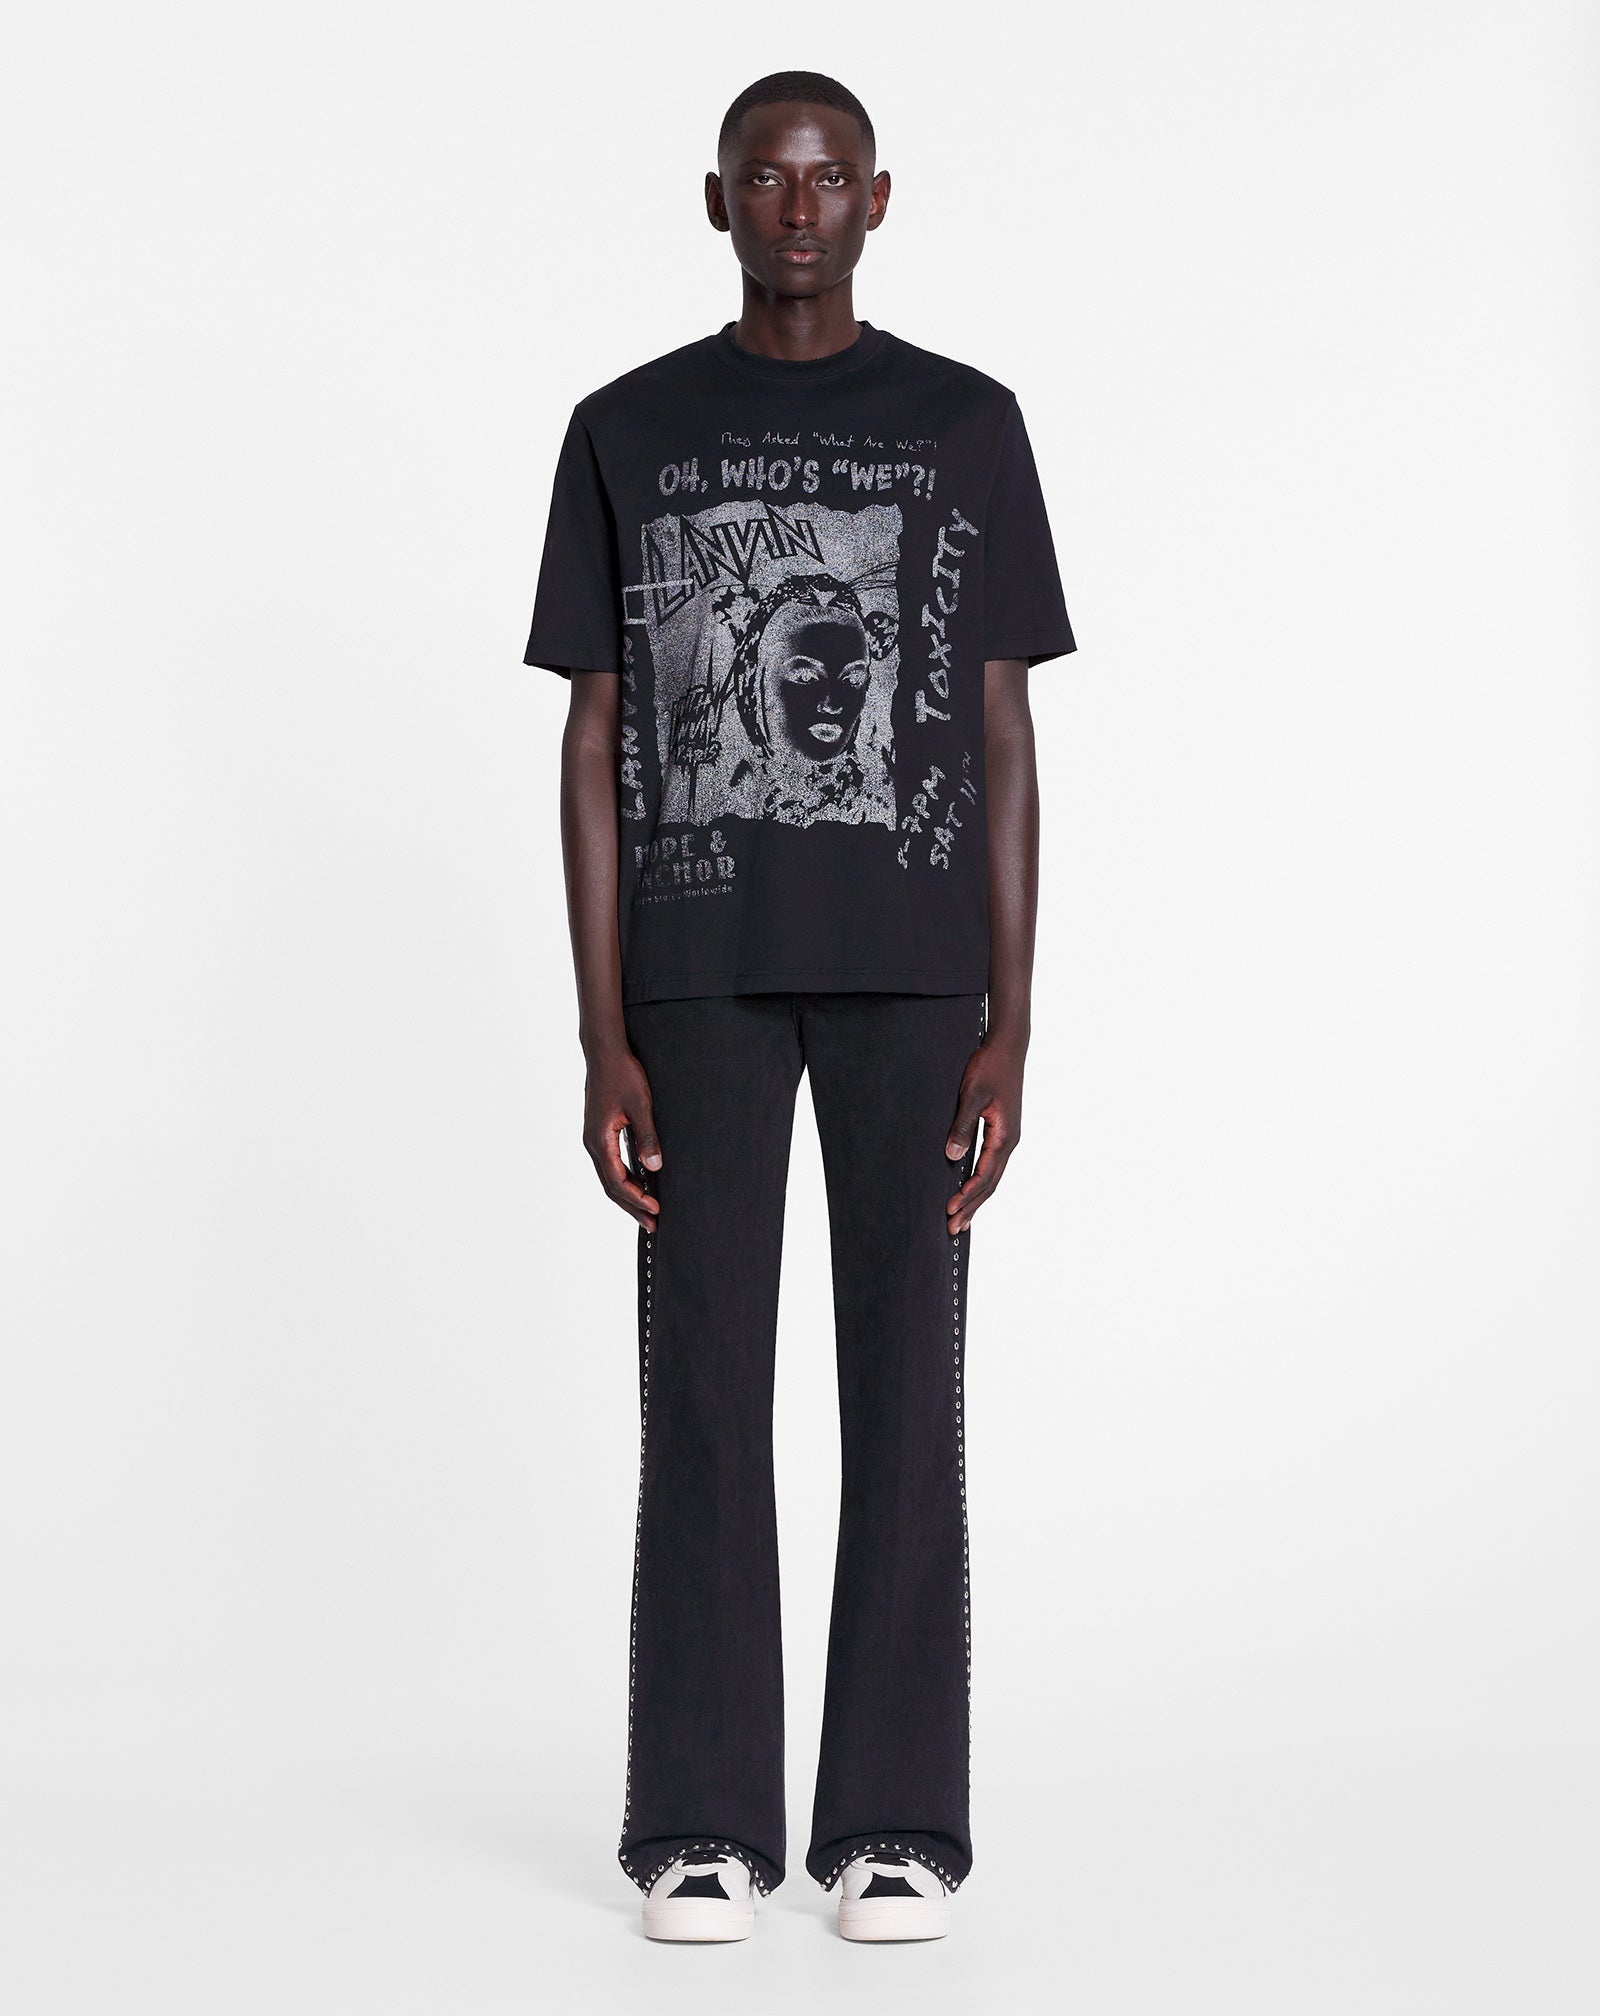 LANVIN X FUTURE STUDDED FLARED PANTS FOR MEN - 2